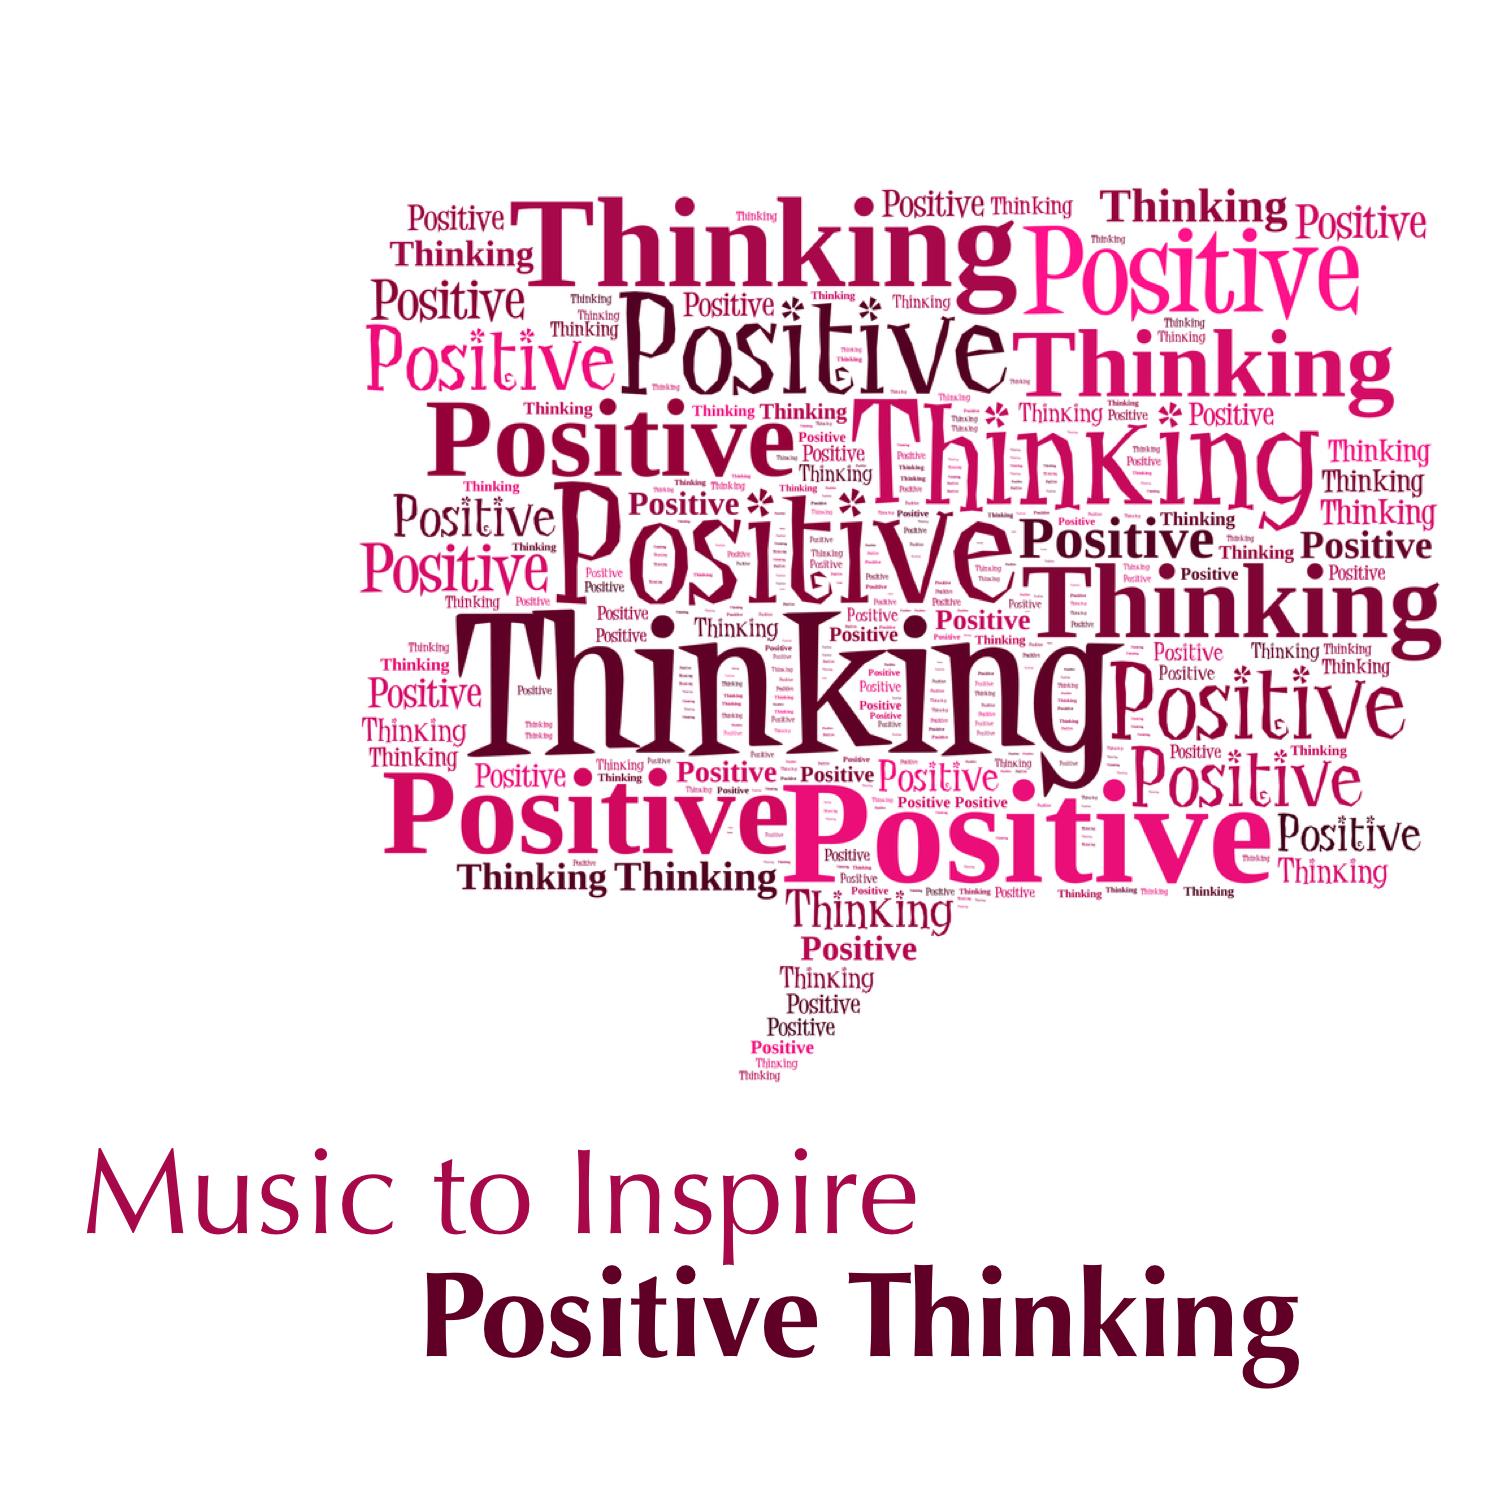 Music to Inspire Positive Thinking